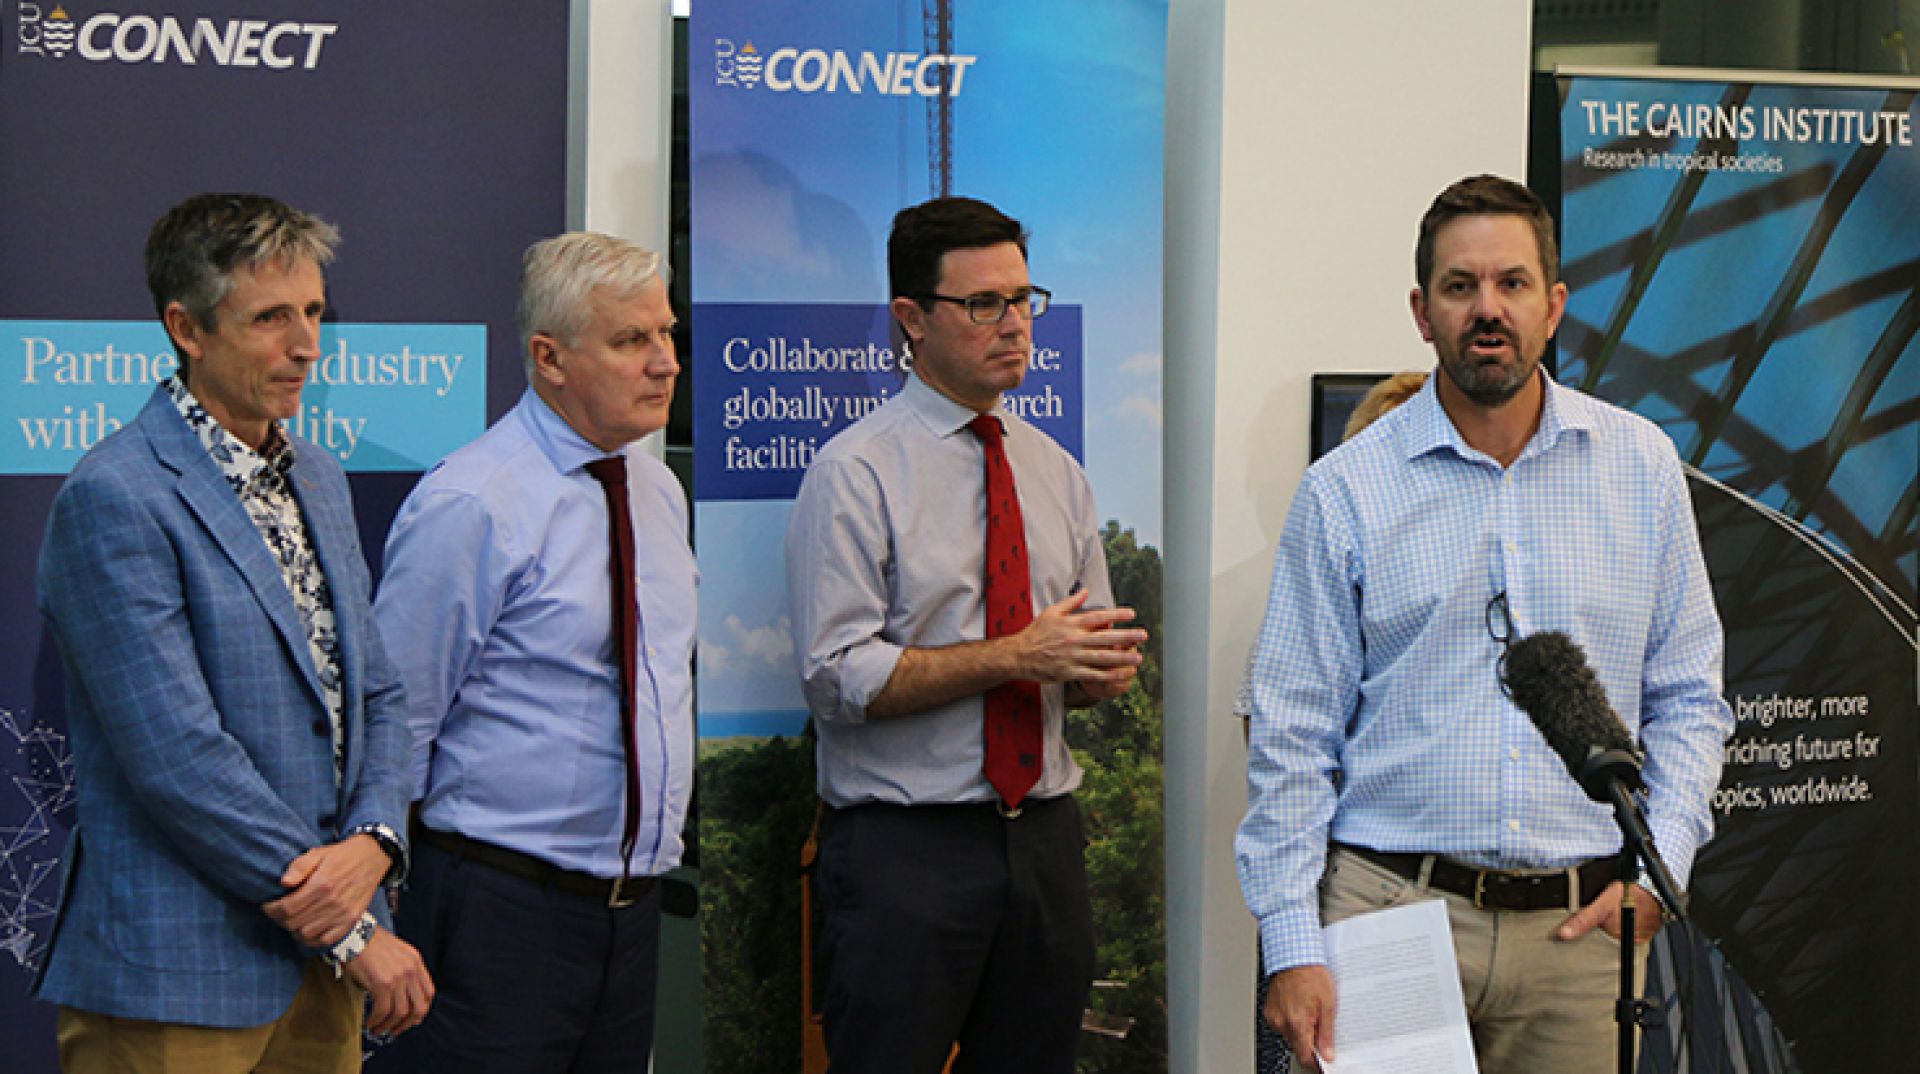 Drought hub director Dan Christie speaking at the launch, with Cairns Institute director Stewart Lockie, Deputy PM Michael McCormack and Minister David Littleproud standing alongside.